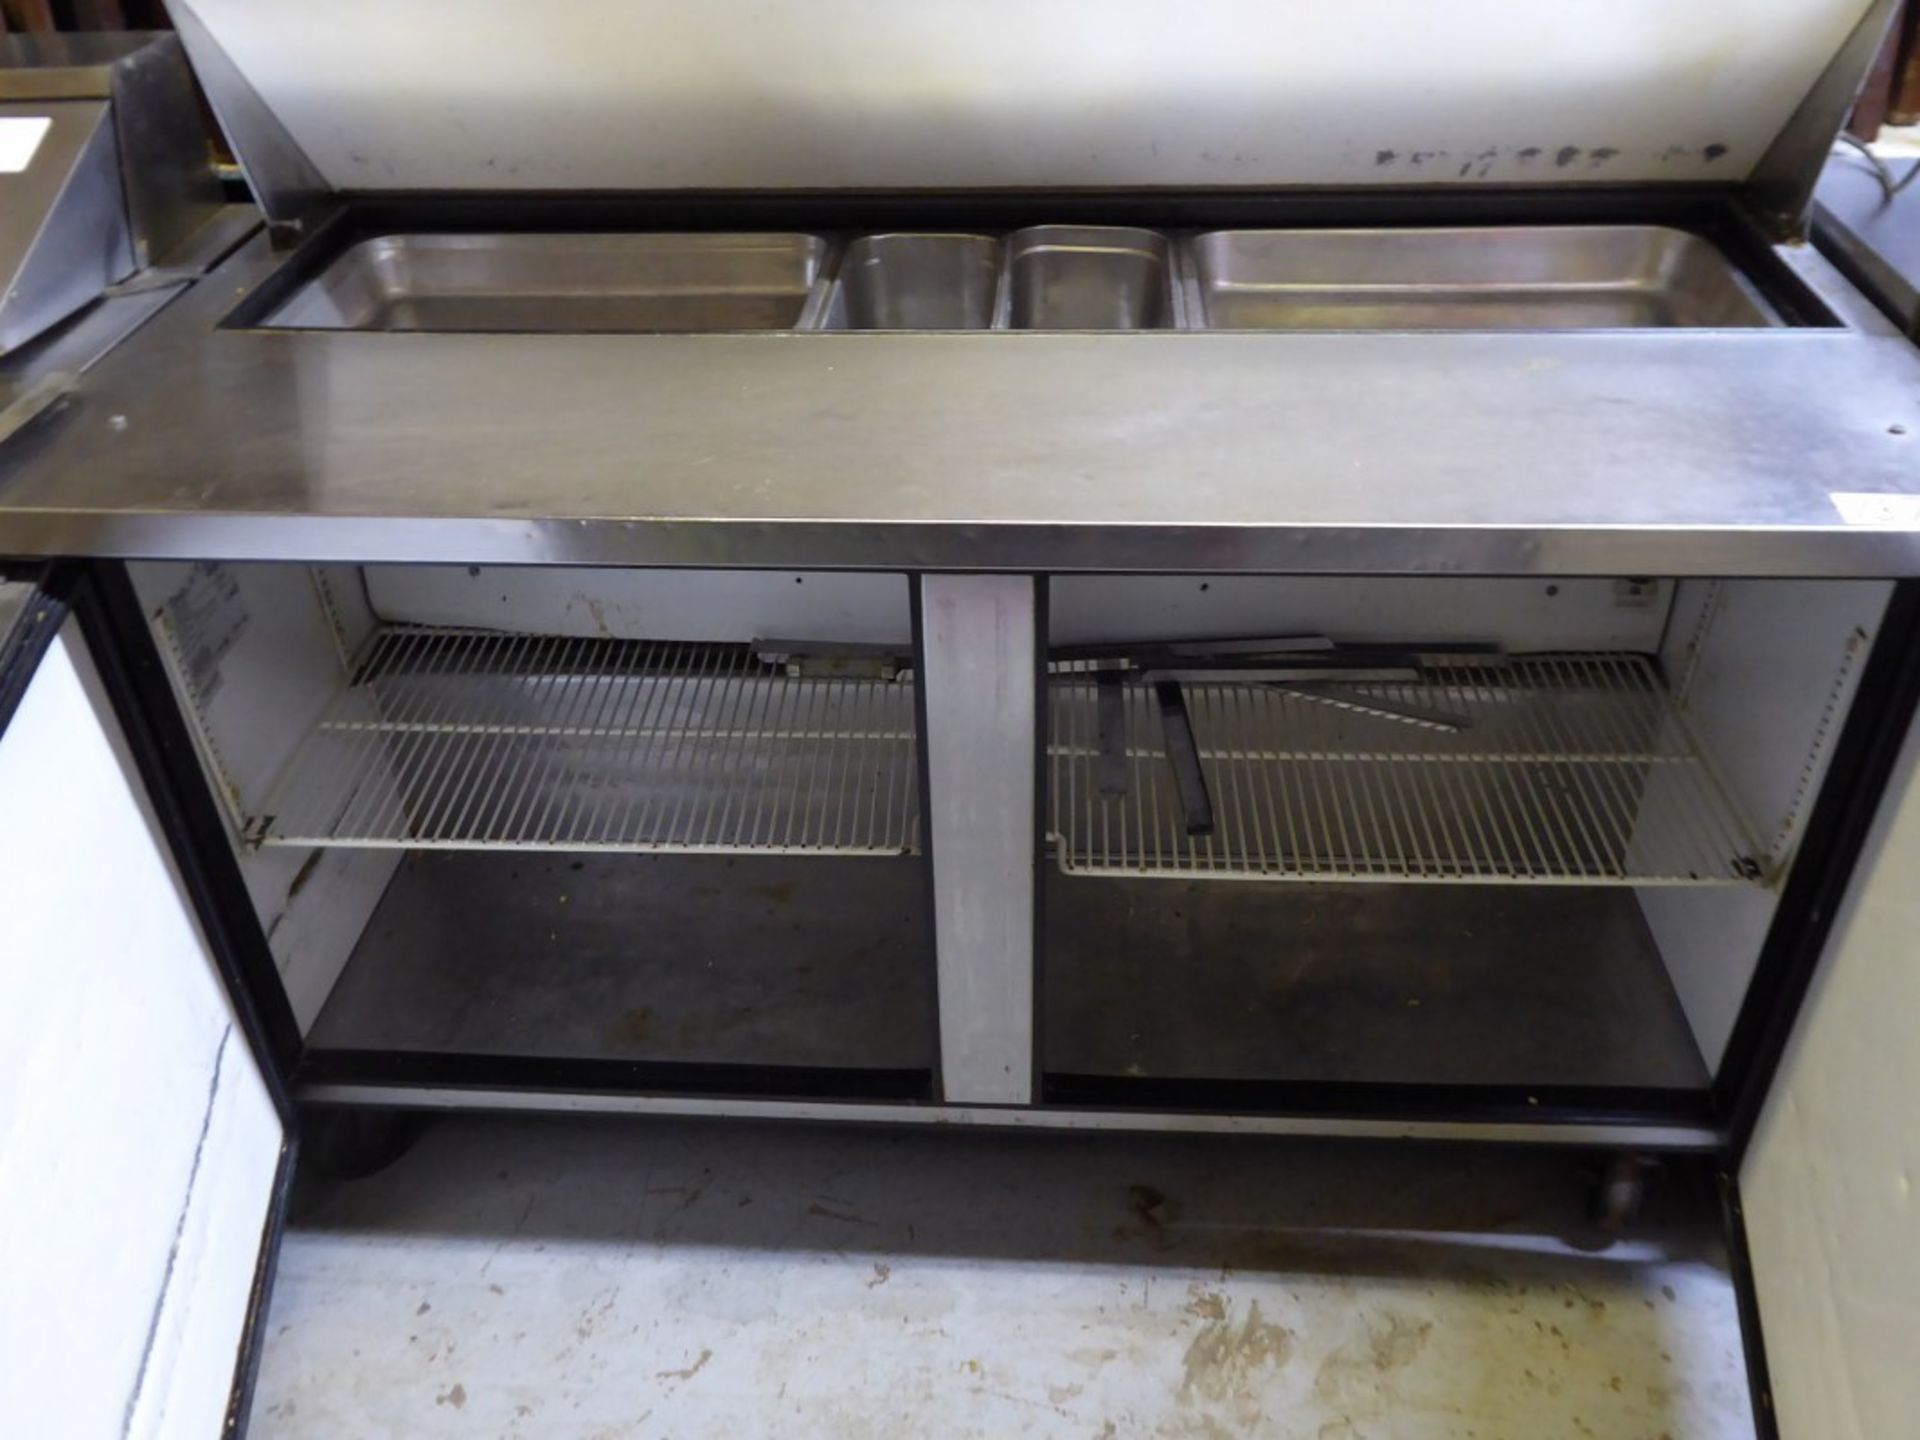 TRUE REFRIGERATION - 2 DOOR STAINLESS STEEL FOOD PREP TABLE W/ STAINLESS STEEL COVER - MODEL # - Image 2 of 3